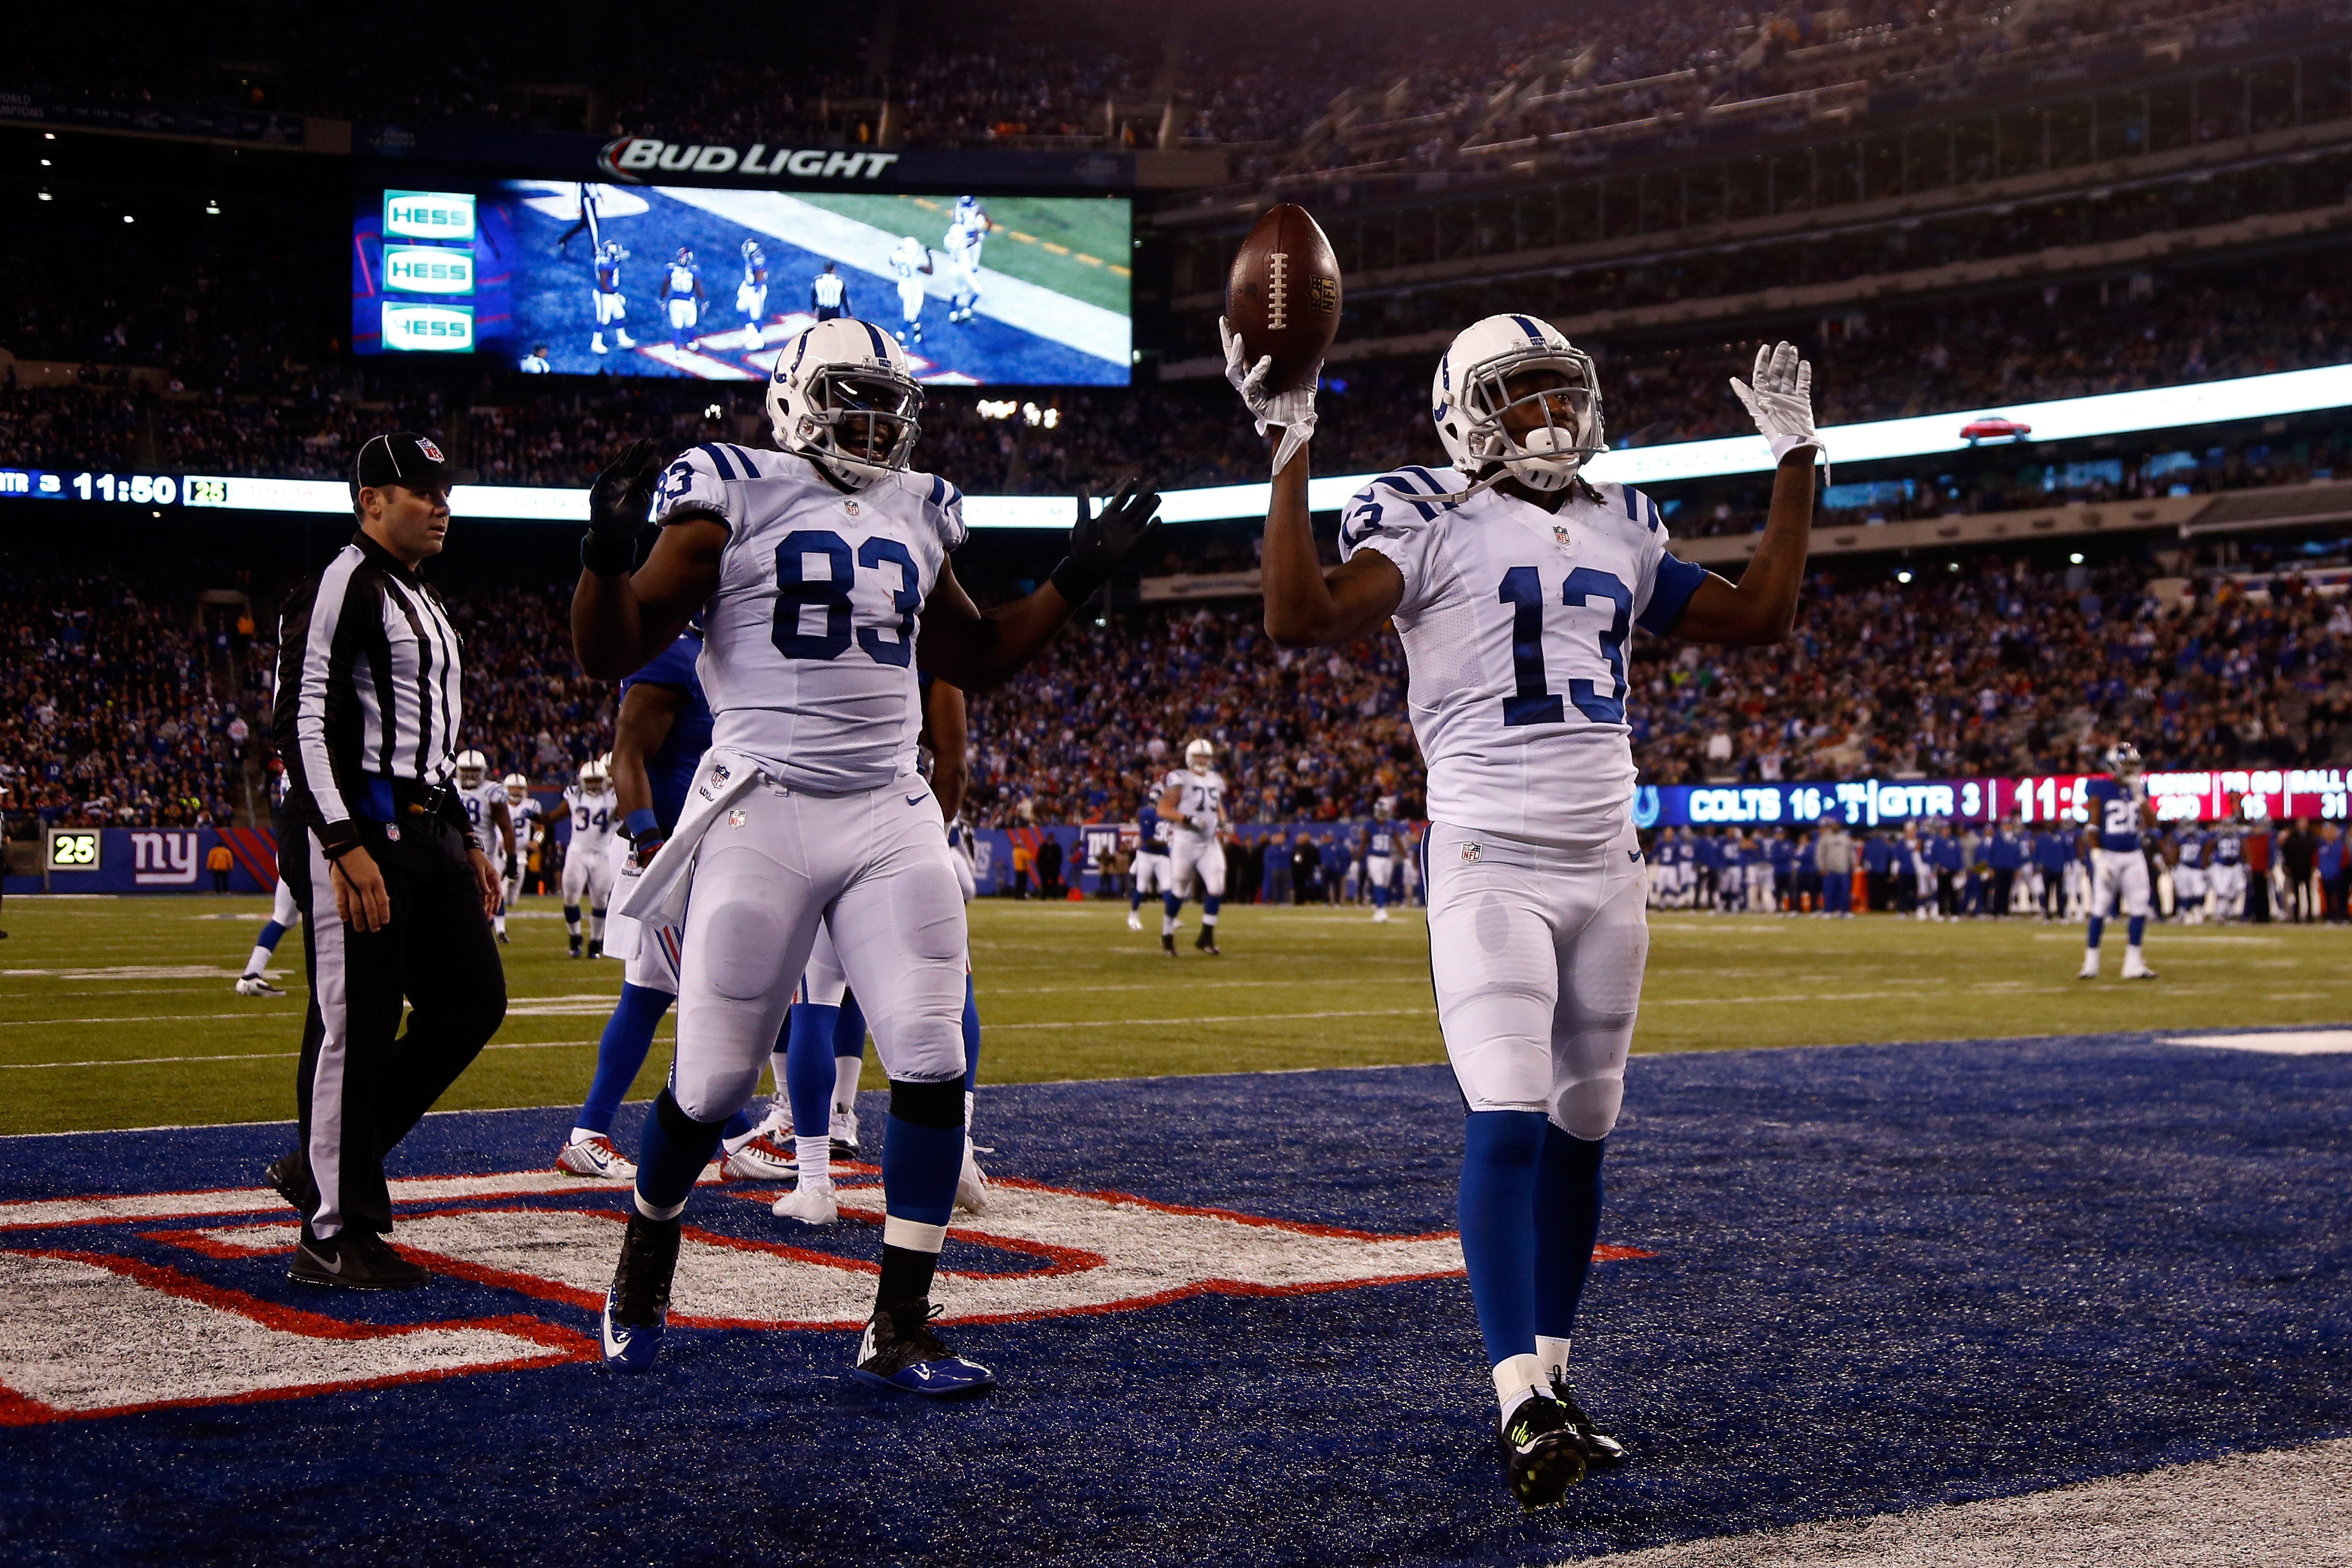 EAST RUTHERFORD, NJ - NOVEMBER 03: T.Y. Hilton #13 of the Indianapolis Colts celebrates with Dwayne Allen #83 after catching 30 yard touchdown pass thrown by Andrew Luck #12 in the third quarter against the New York Giants during their game at MetLife Stadium on November 3, 2014 in East Rutherford, New Jersey. (Photo by Jeff Zelevansky/Getty Images)